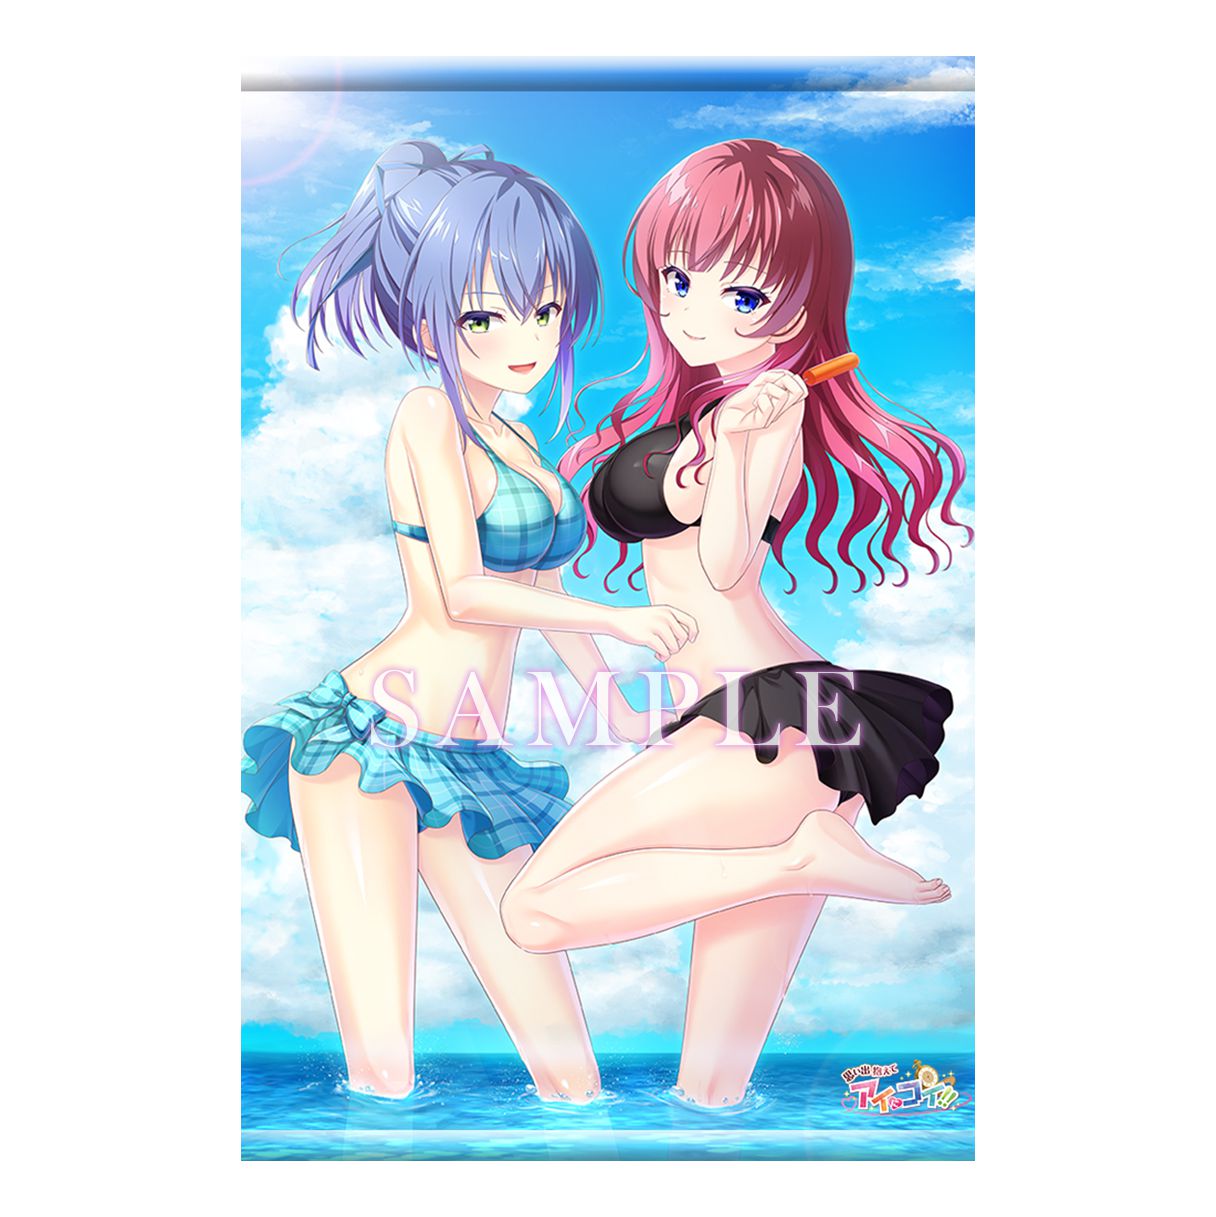 PS4 / Switch version "Memories Hold Ai ni Koi" Event CG and store benefits such as girls' erotic underwear 7